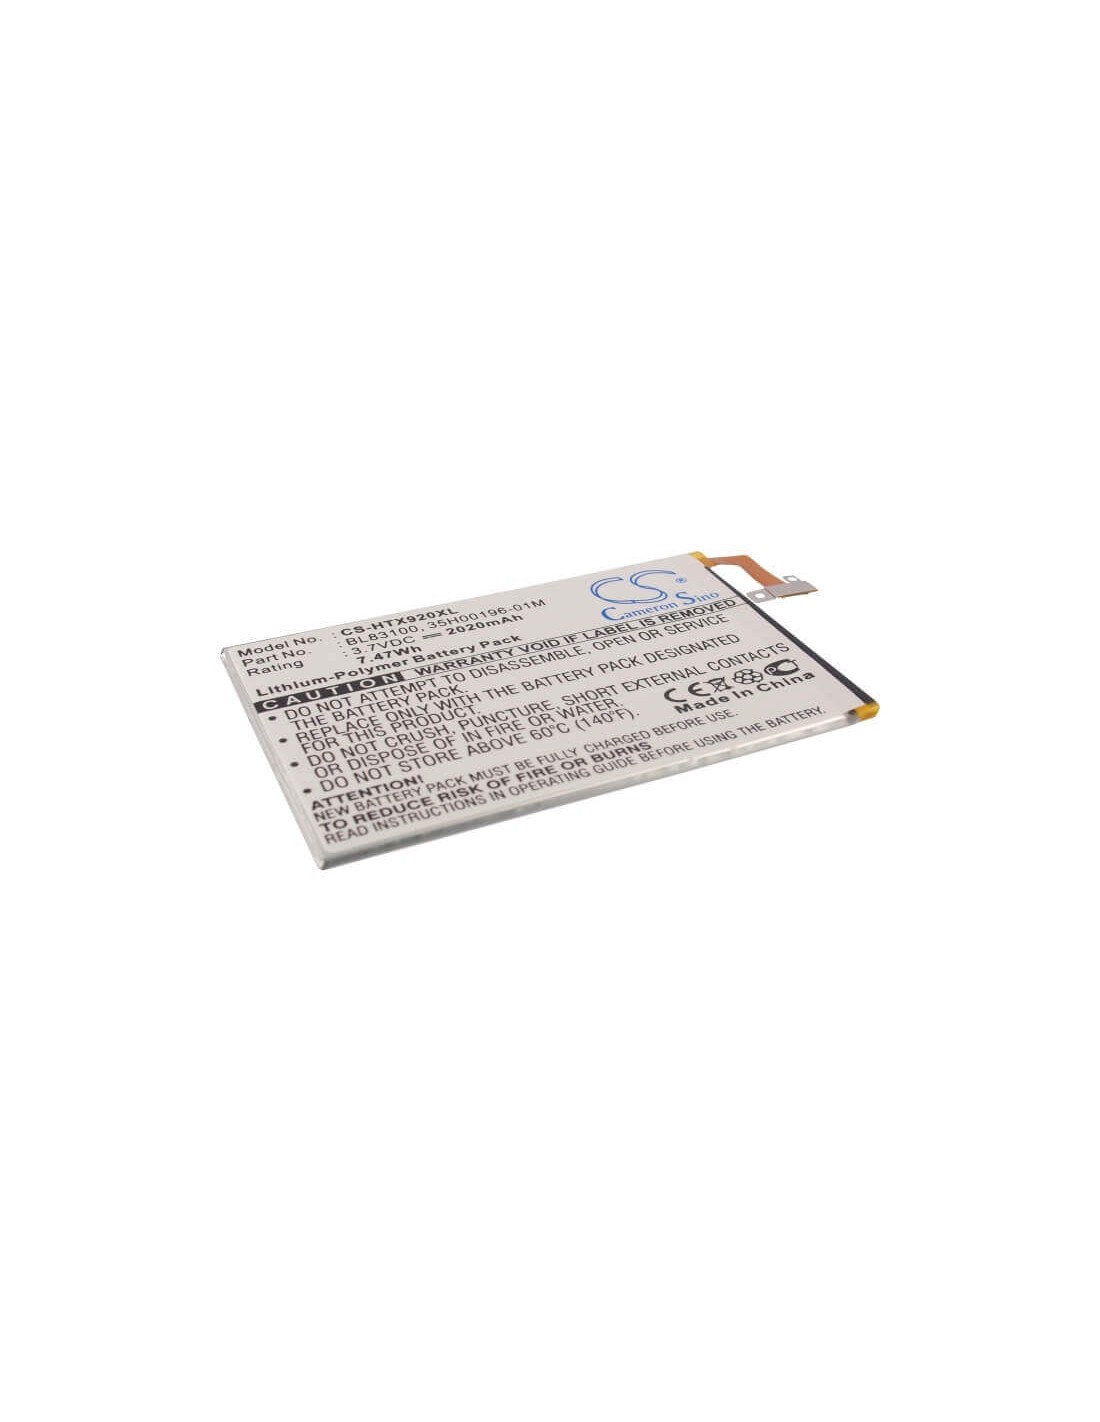 Battery for HTC J butterfly, HTL21, X920 3.8V, 2020mAh - 7.68Wh